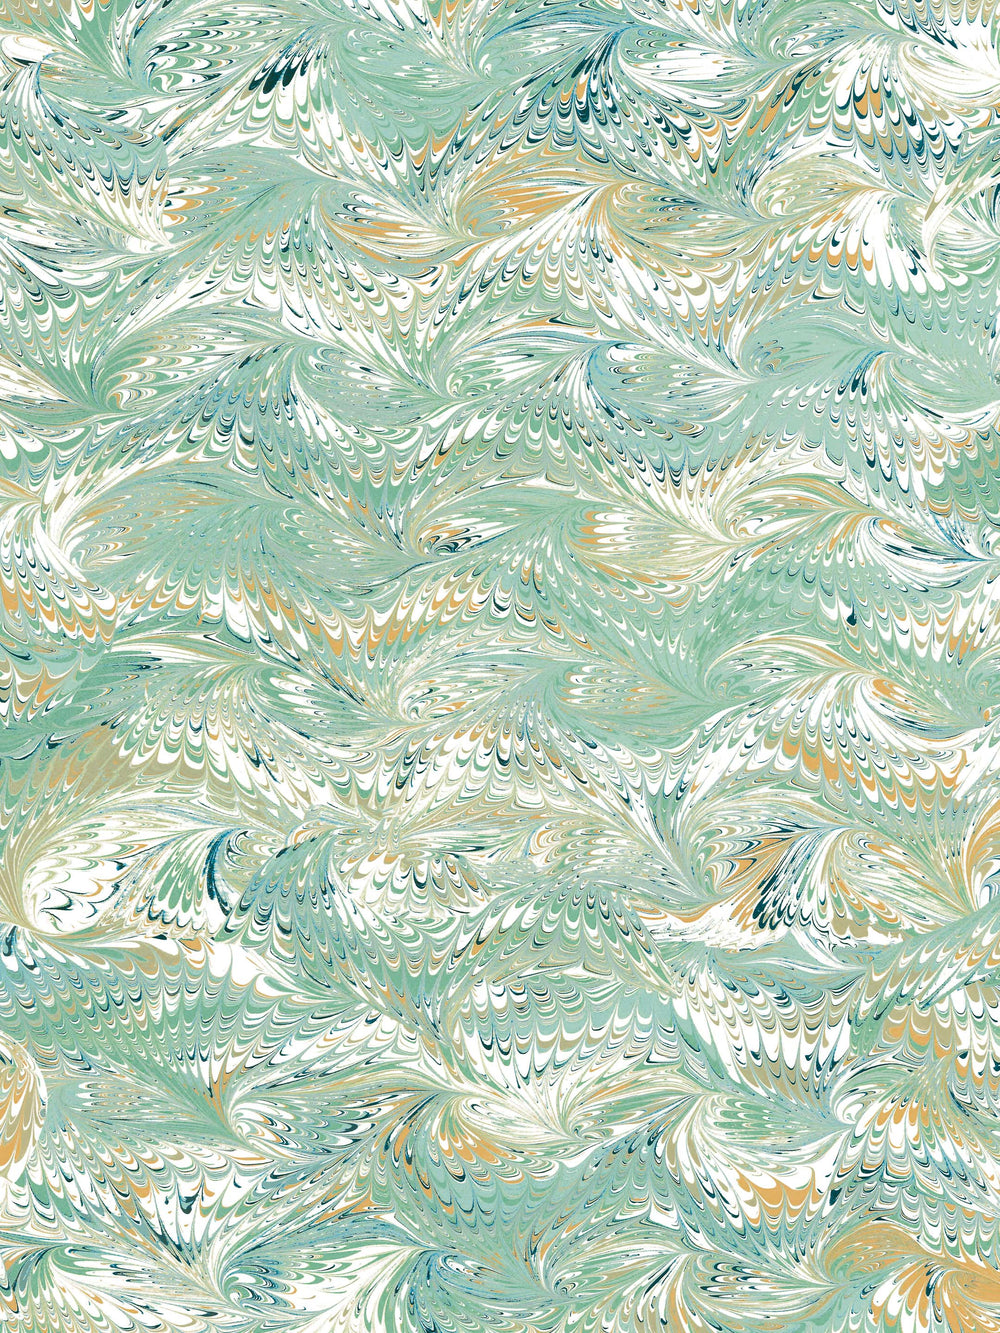 soft green marbled wallpaper design with swirls of white, yellow and dark blue